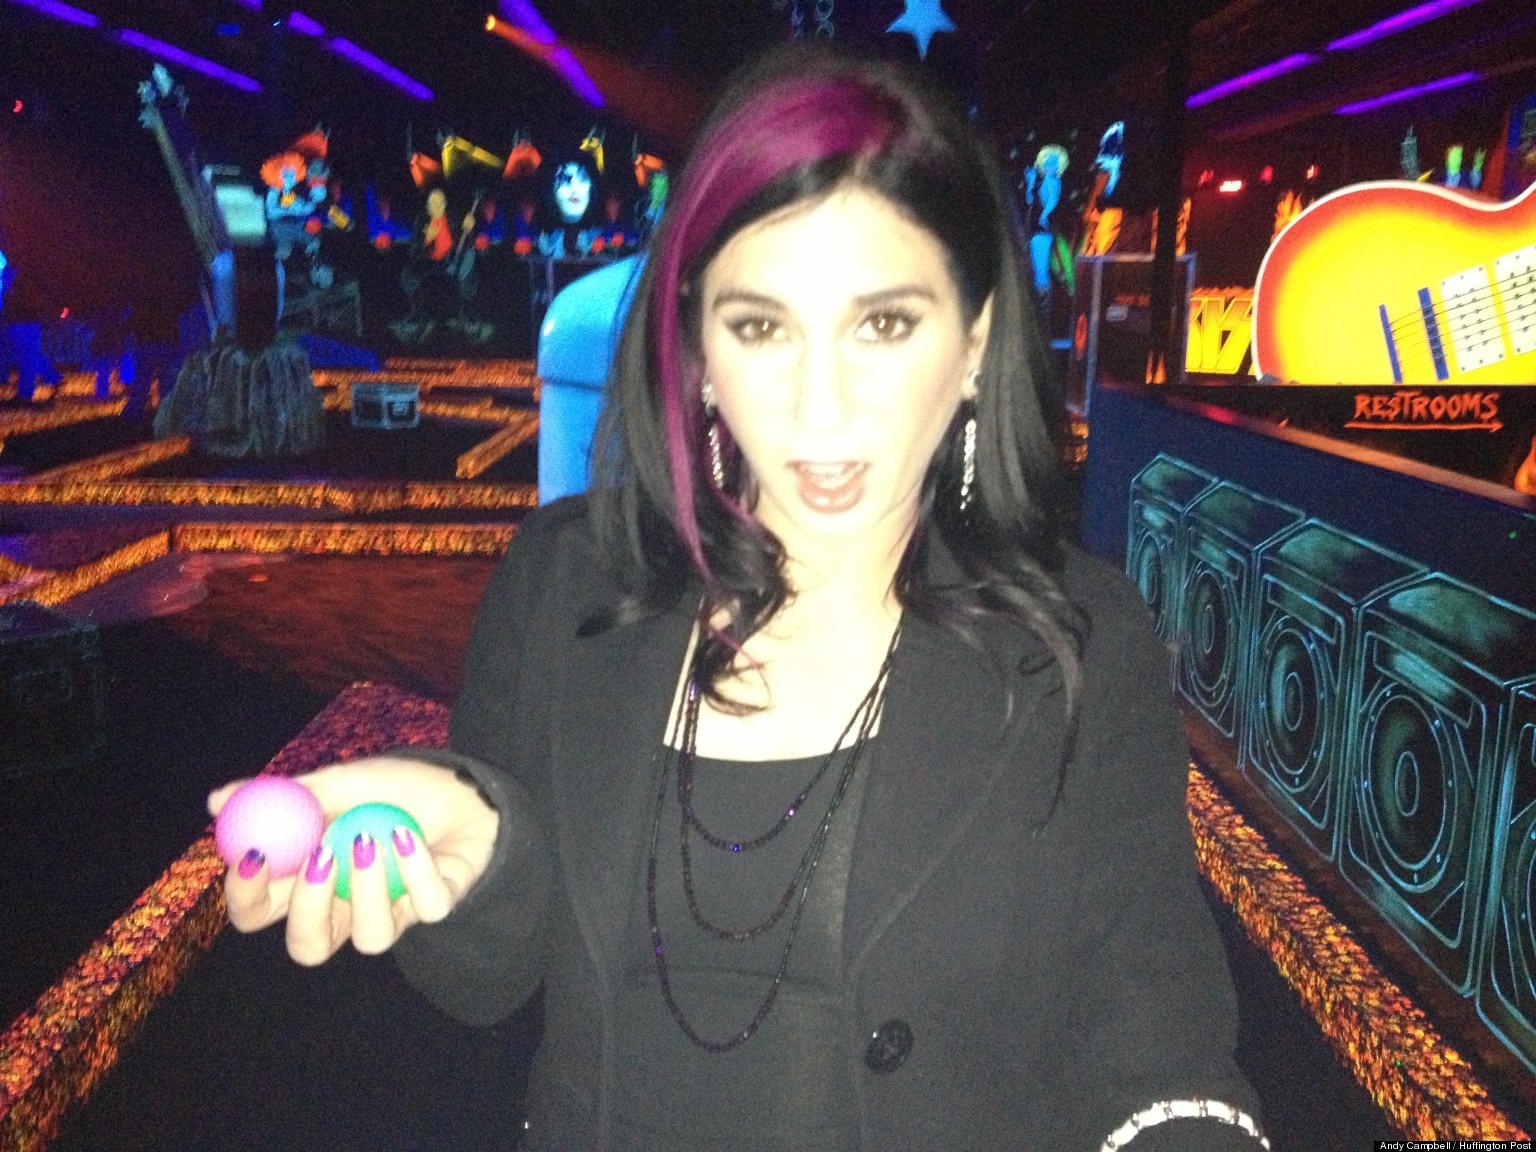 How To Date A Porn Star Night Out With Joanna Angel In Las Vegas Photos Video Huffpost